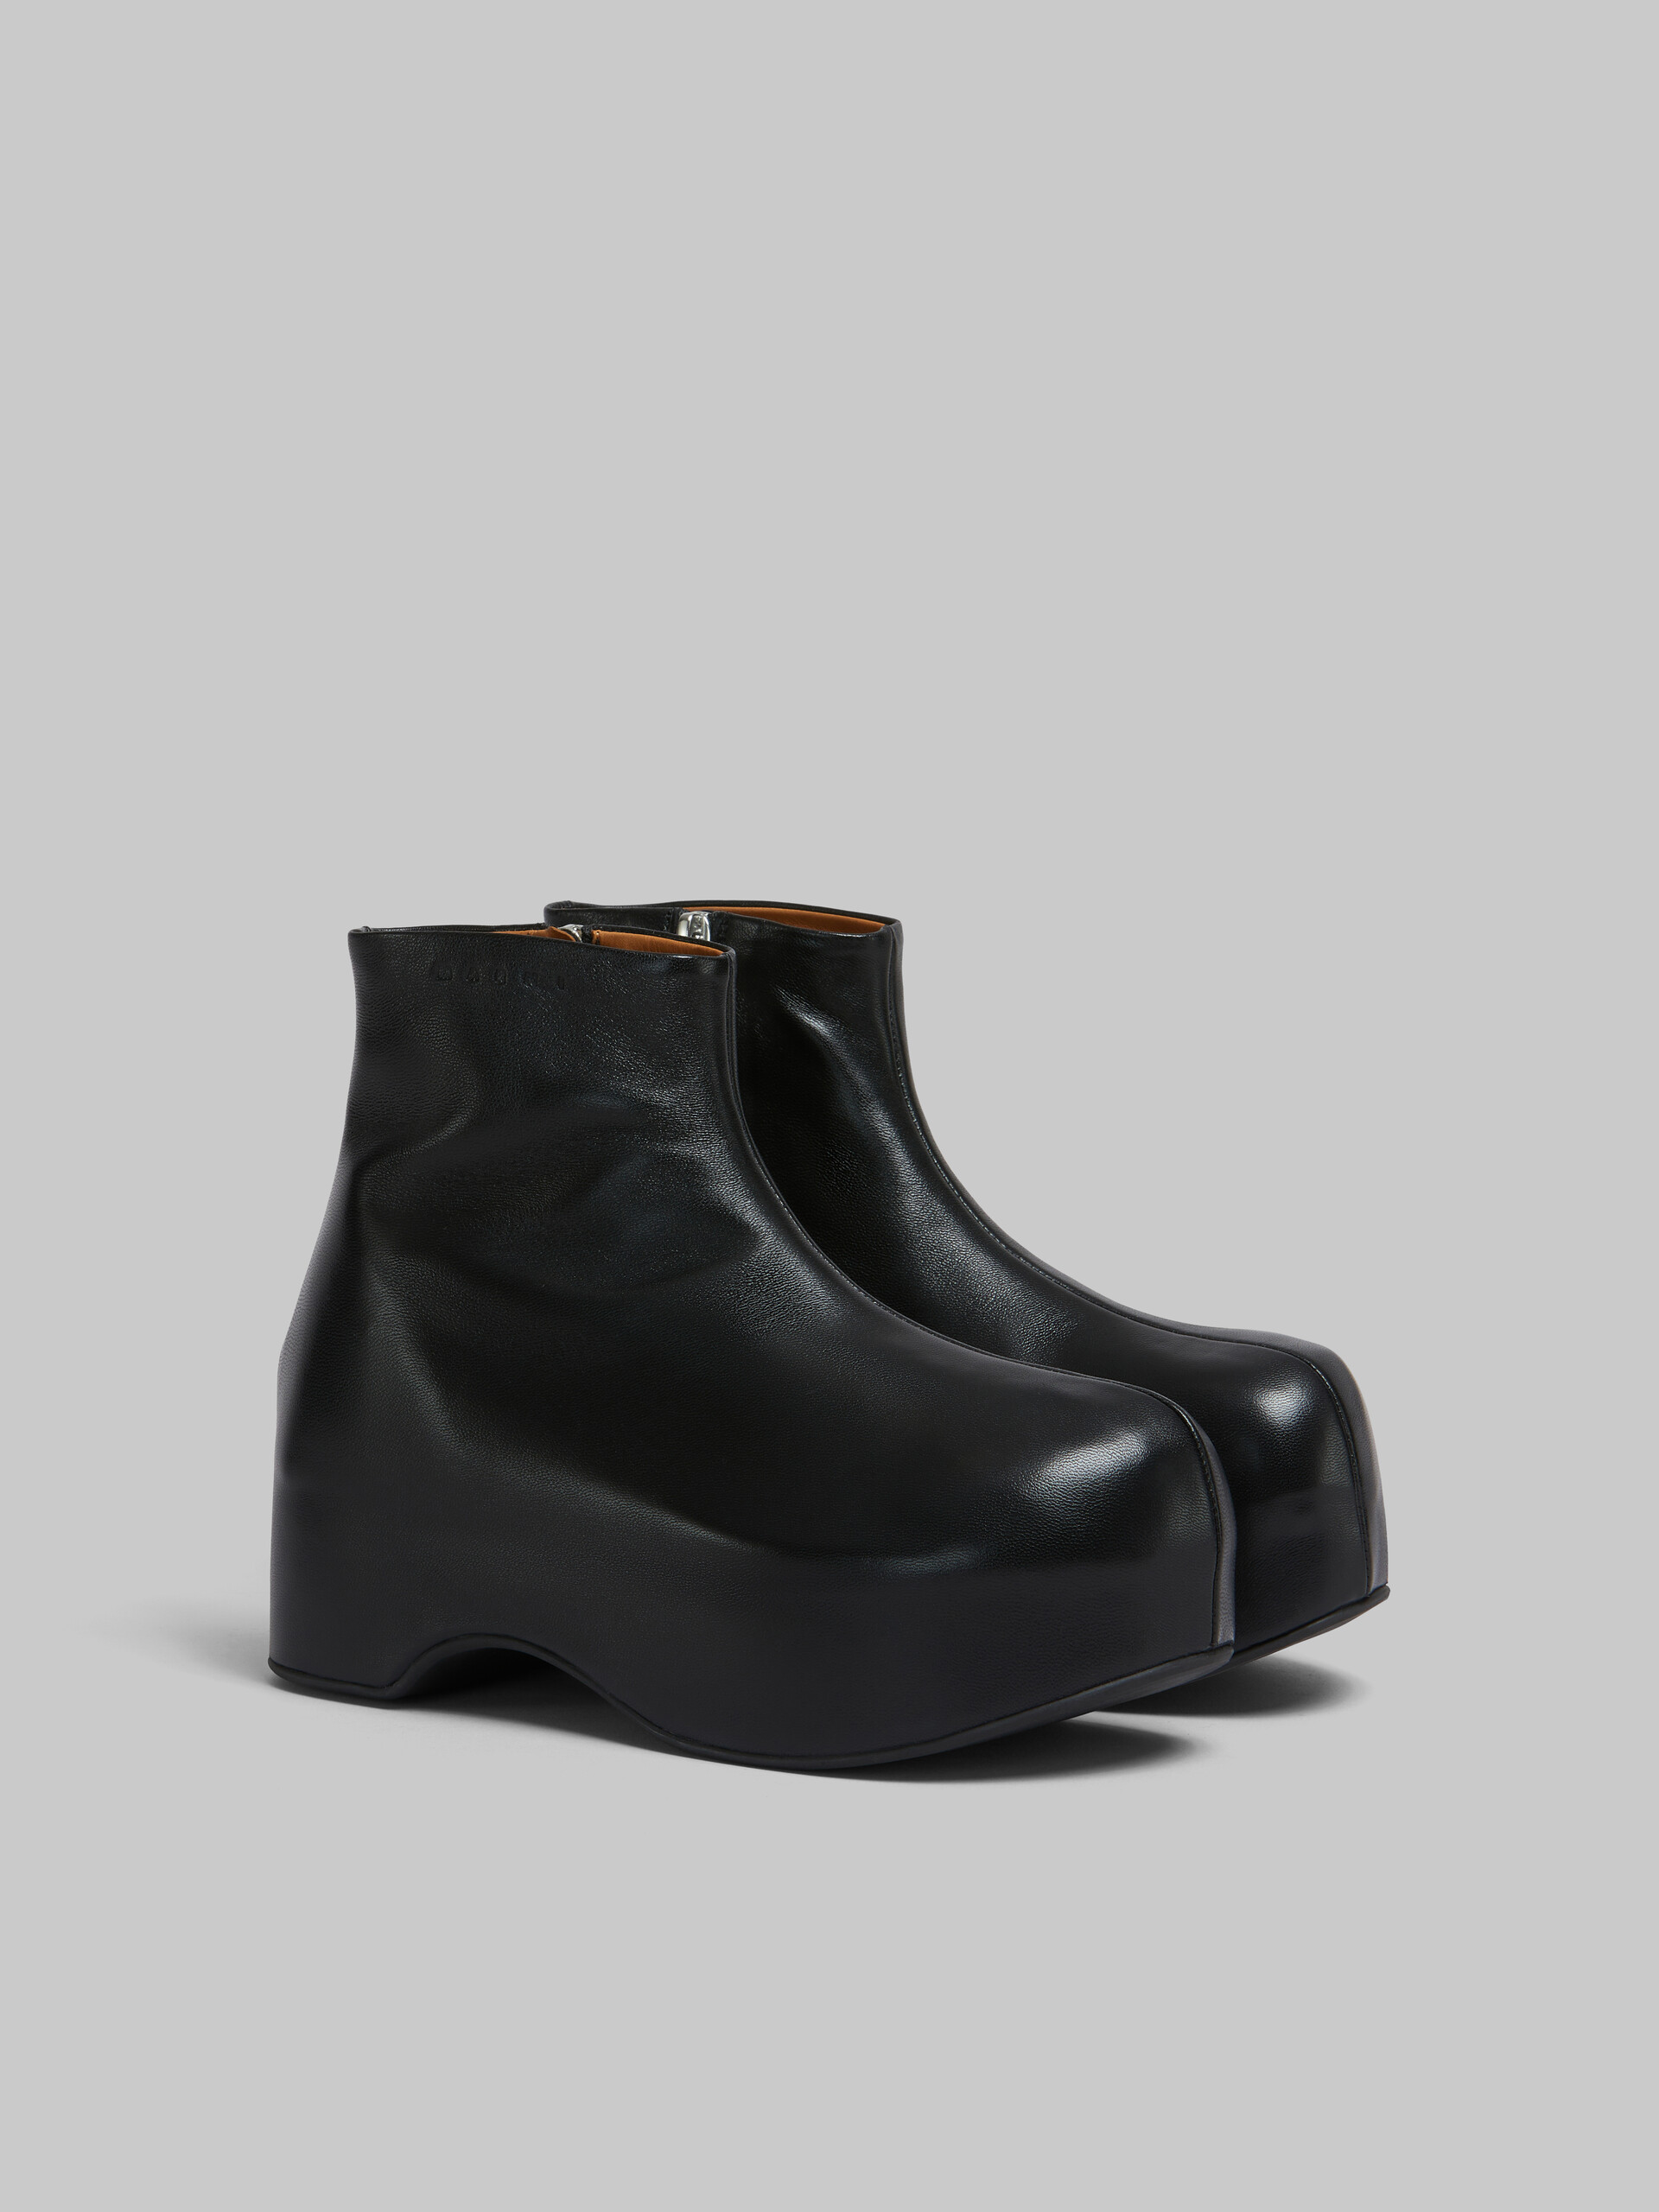 Black leather Chunky Clog boot - Boots - Image 2